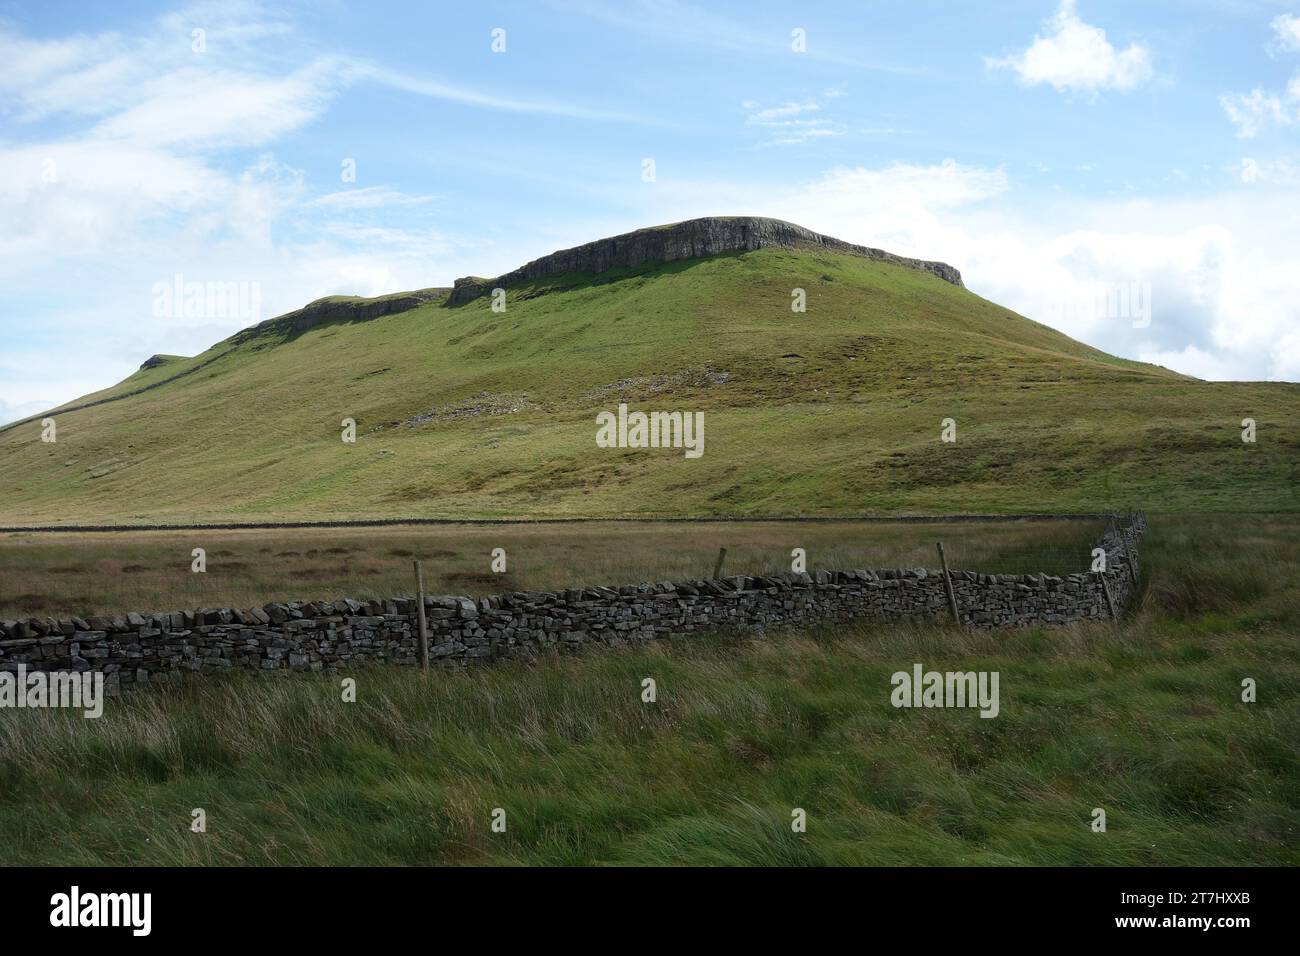 The Flat Topped Summit of Addlebrough Hill from the Path to the Village of Thornton Rust in Wensleydale, Yorkshire Dales National Park, England, UK Stock Photo